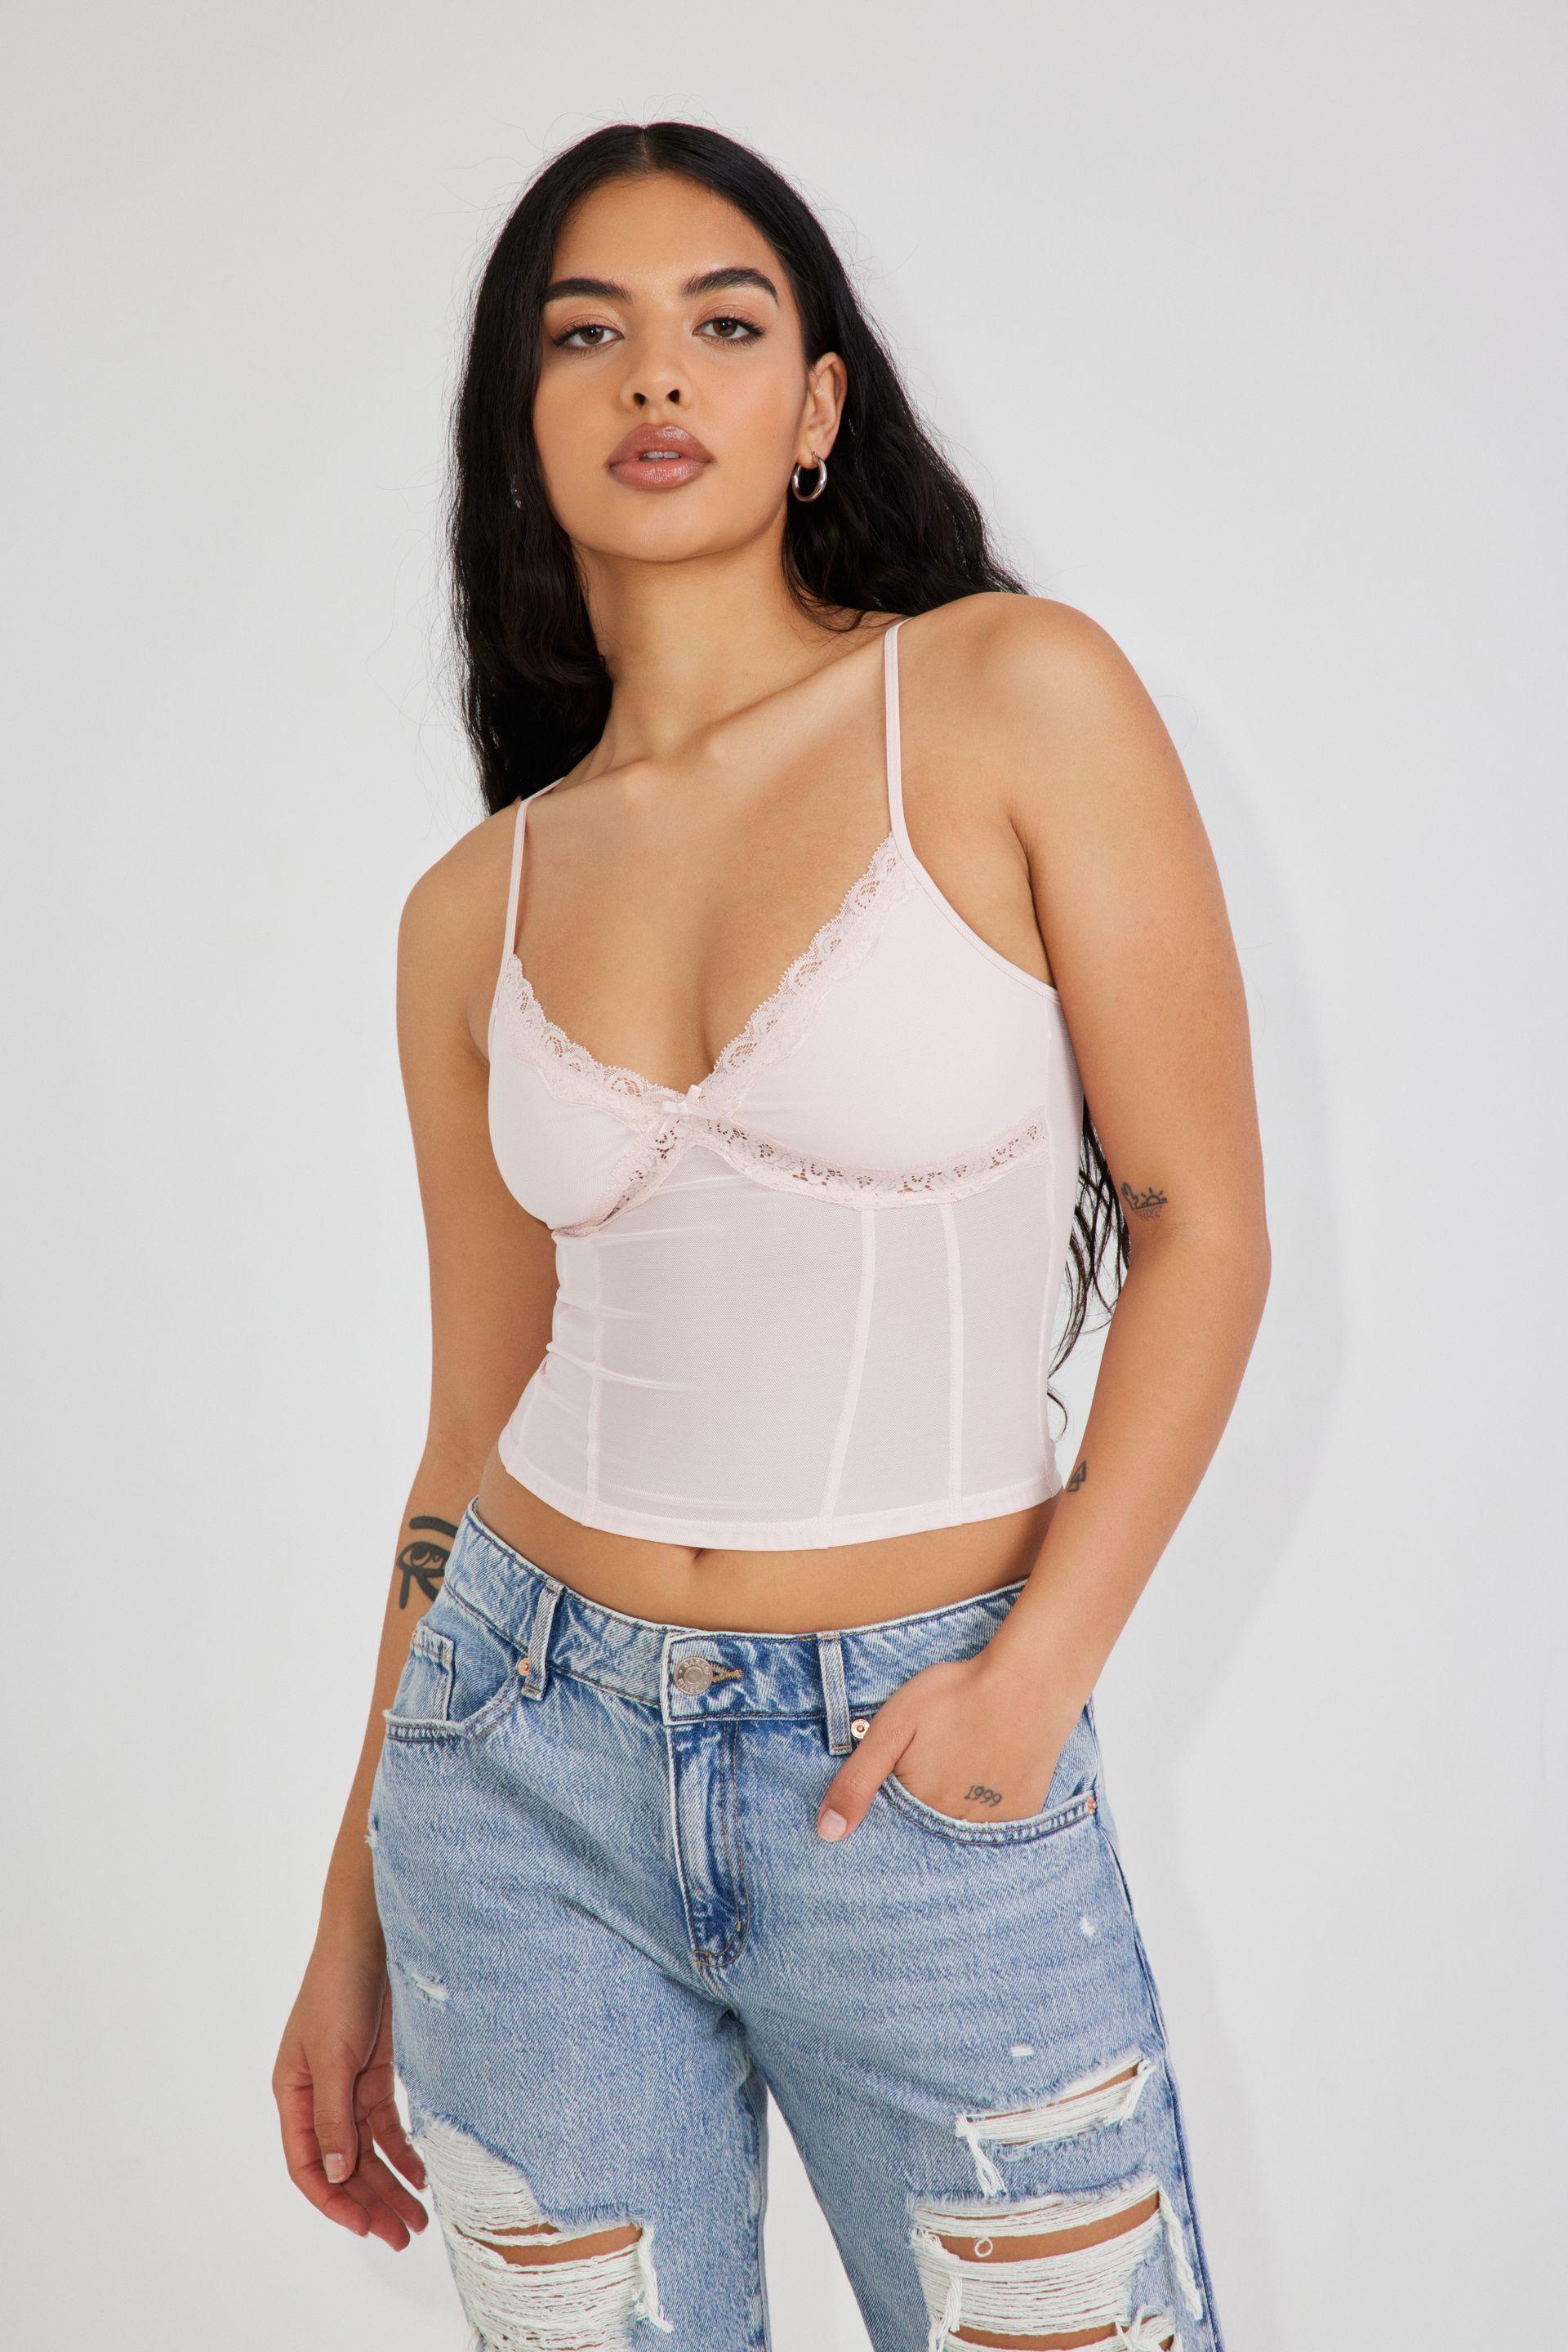 White Lace Crop Top Vintage Cropped Cami Top Sheer White Crop Top